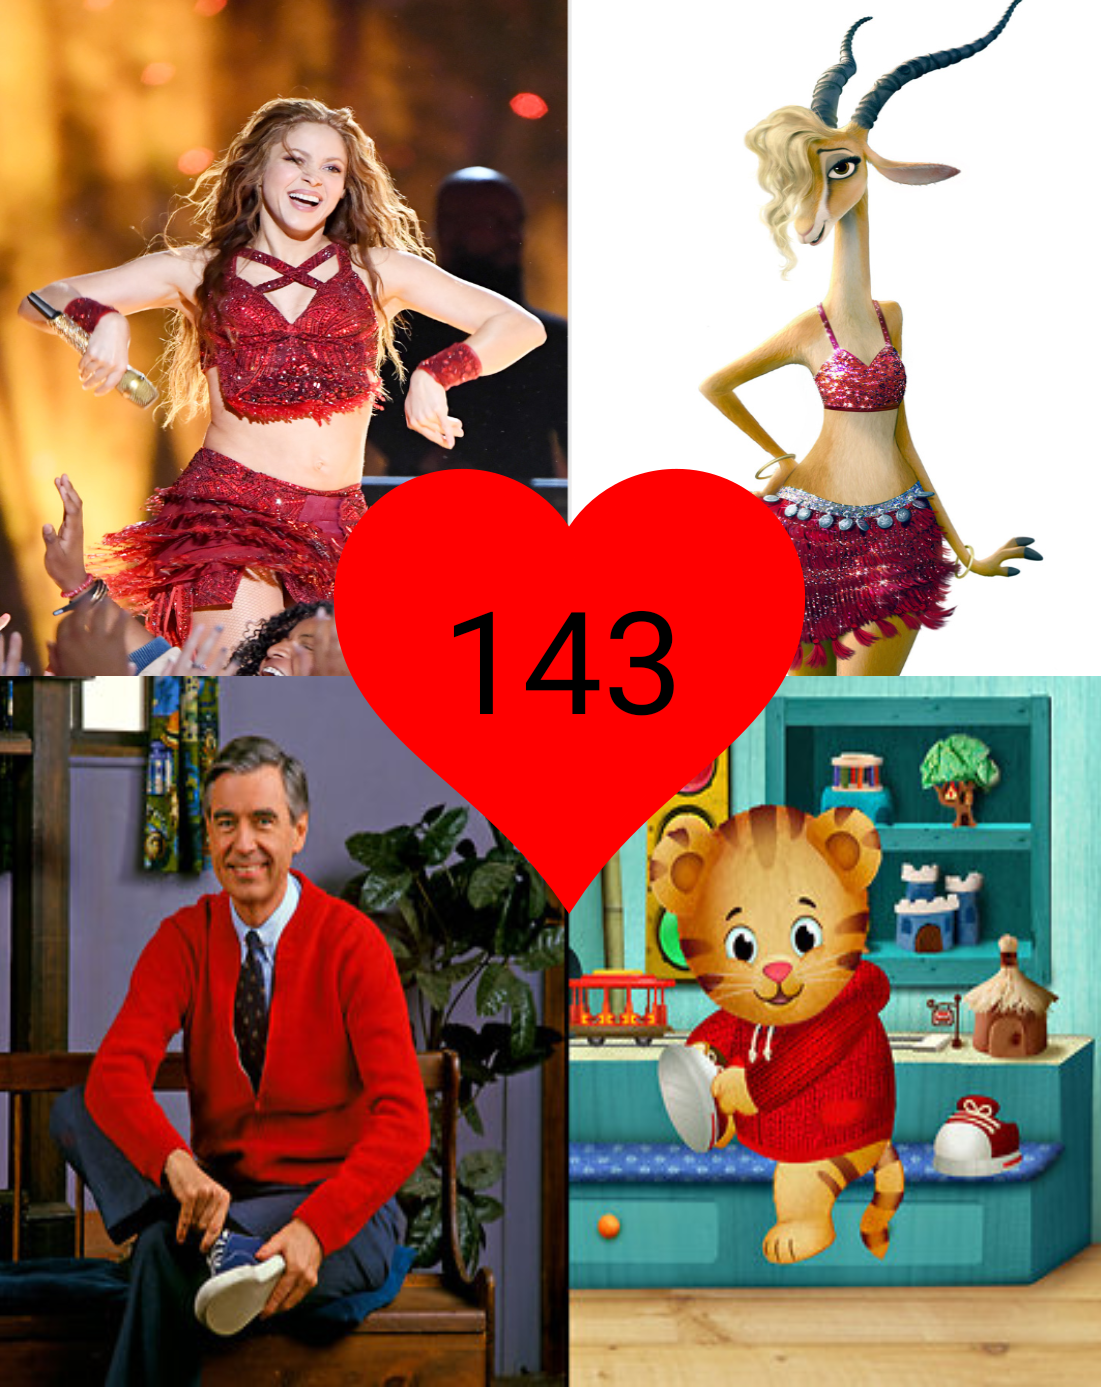 Shakira And Mister Rogers Robots by torrjua11011 on DeviantArt